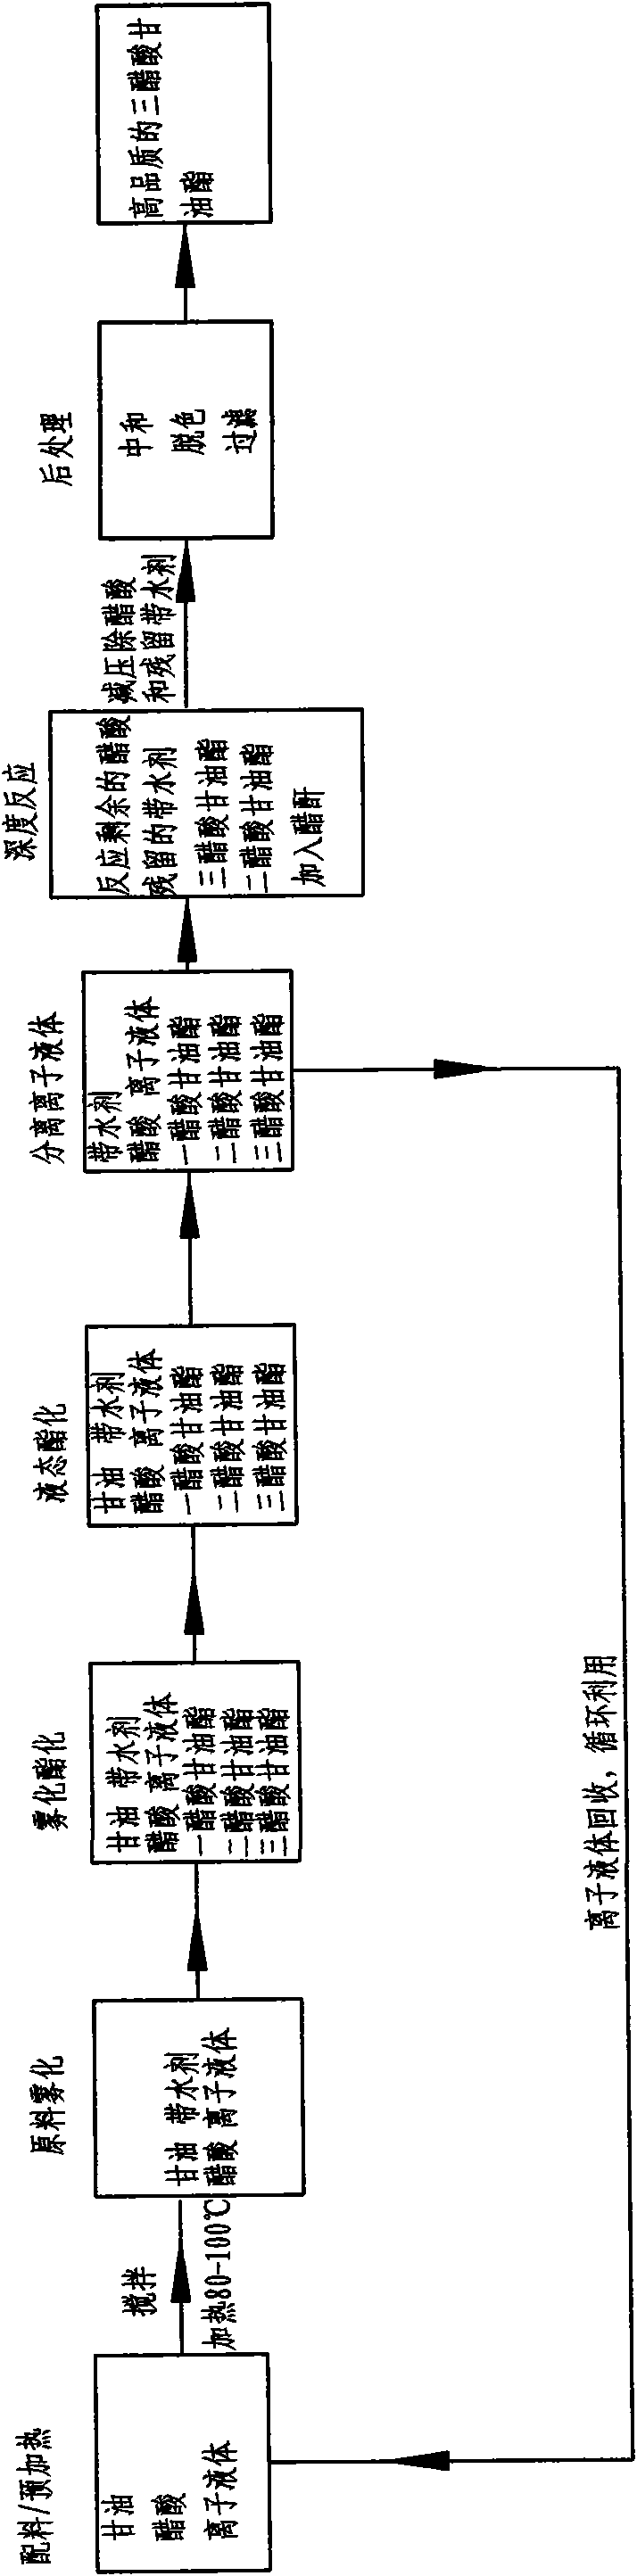 Method for producing glyceryl triacetate by atomizing raw materials